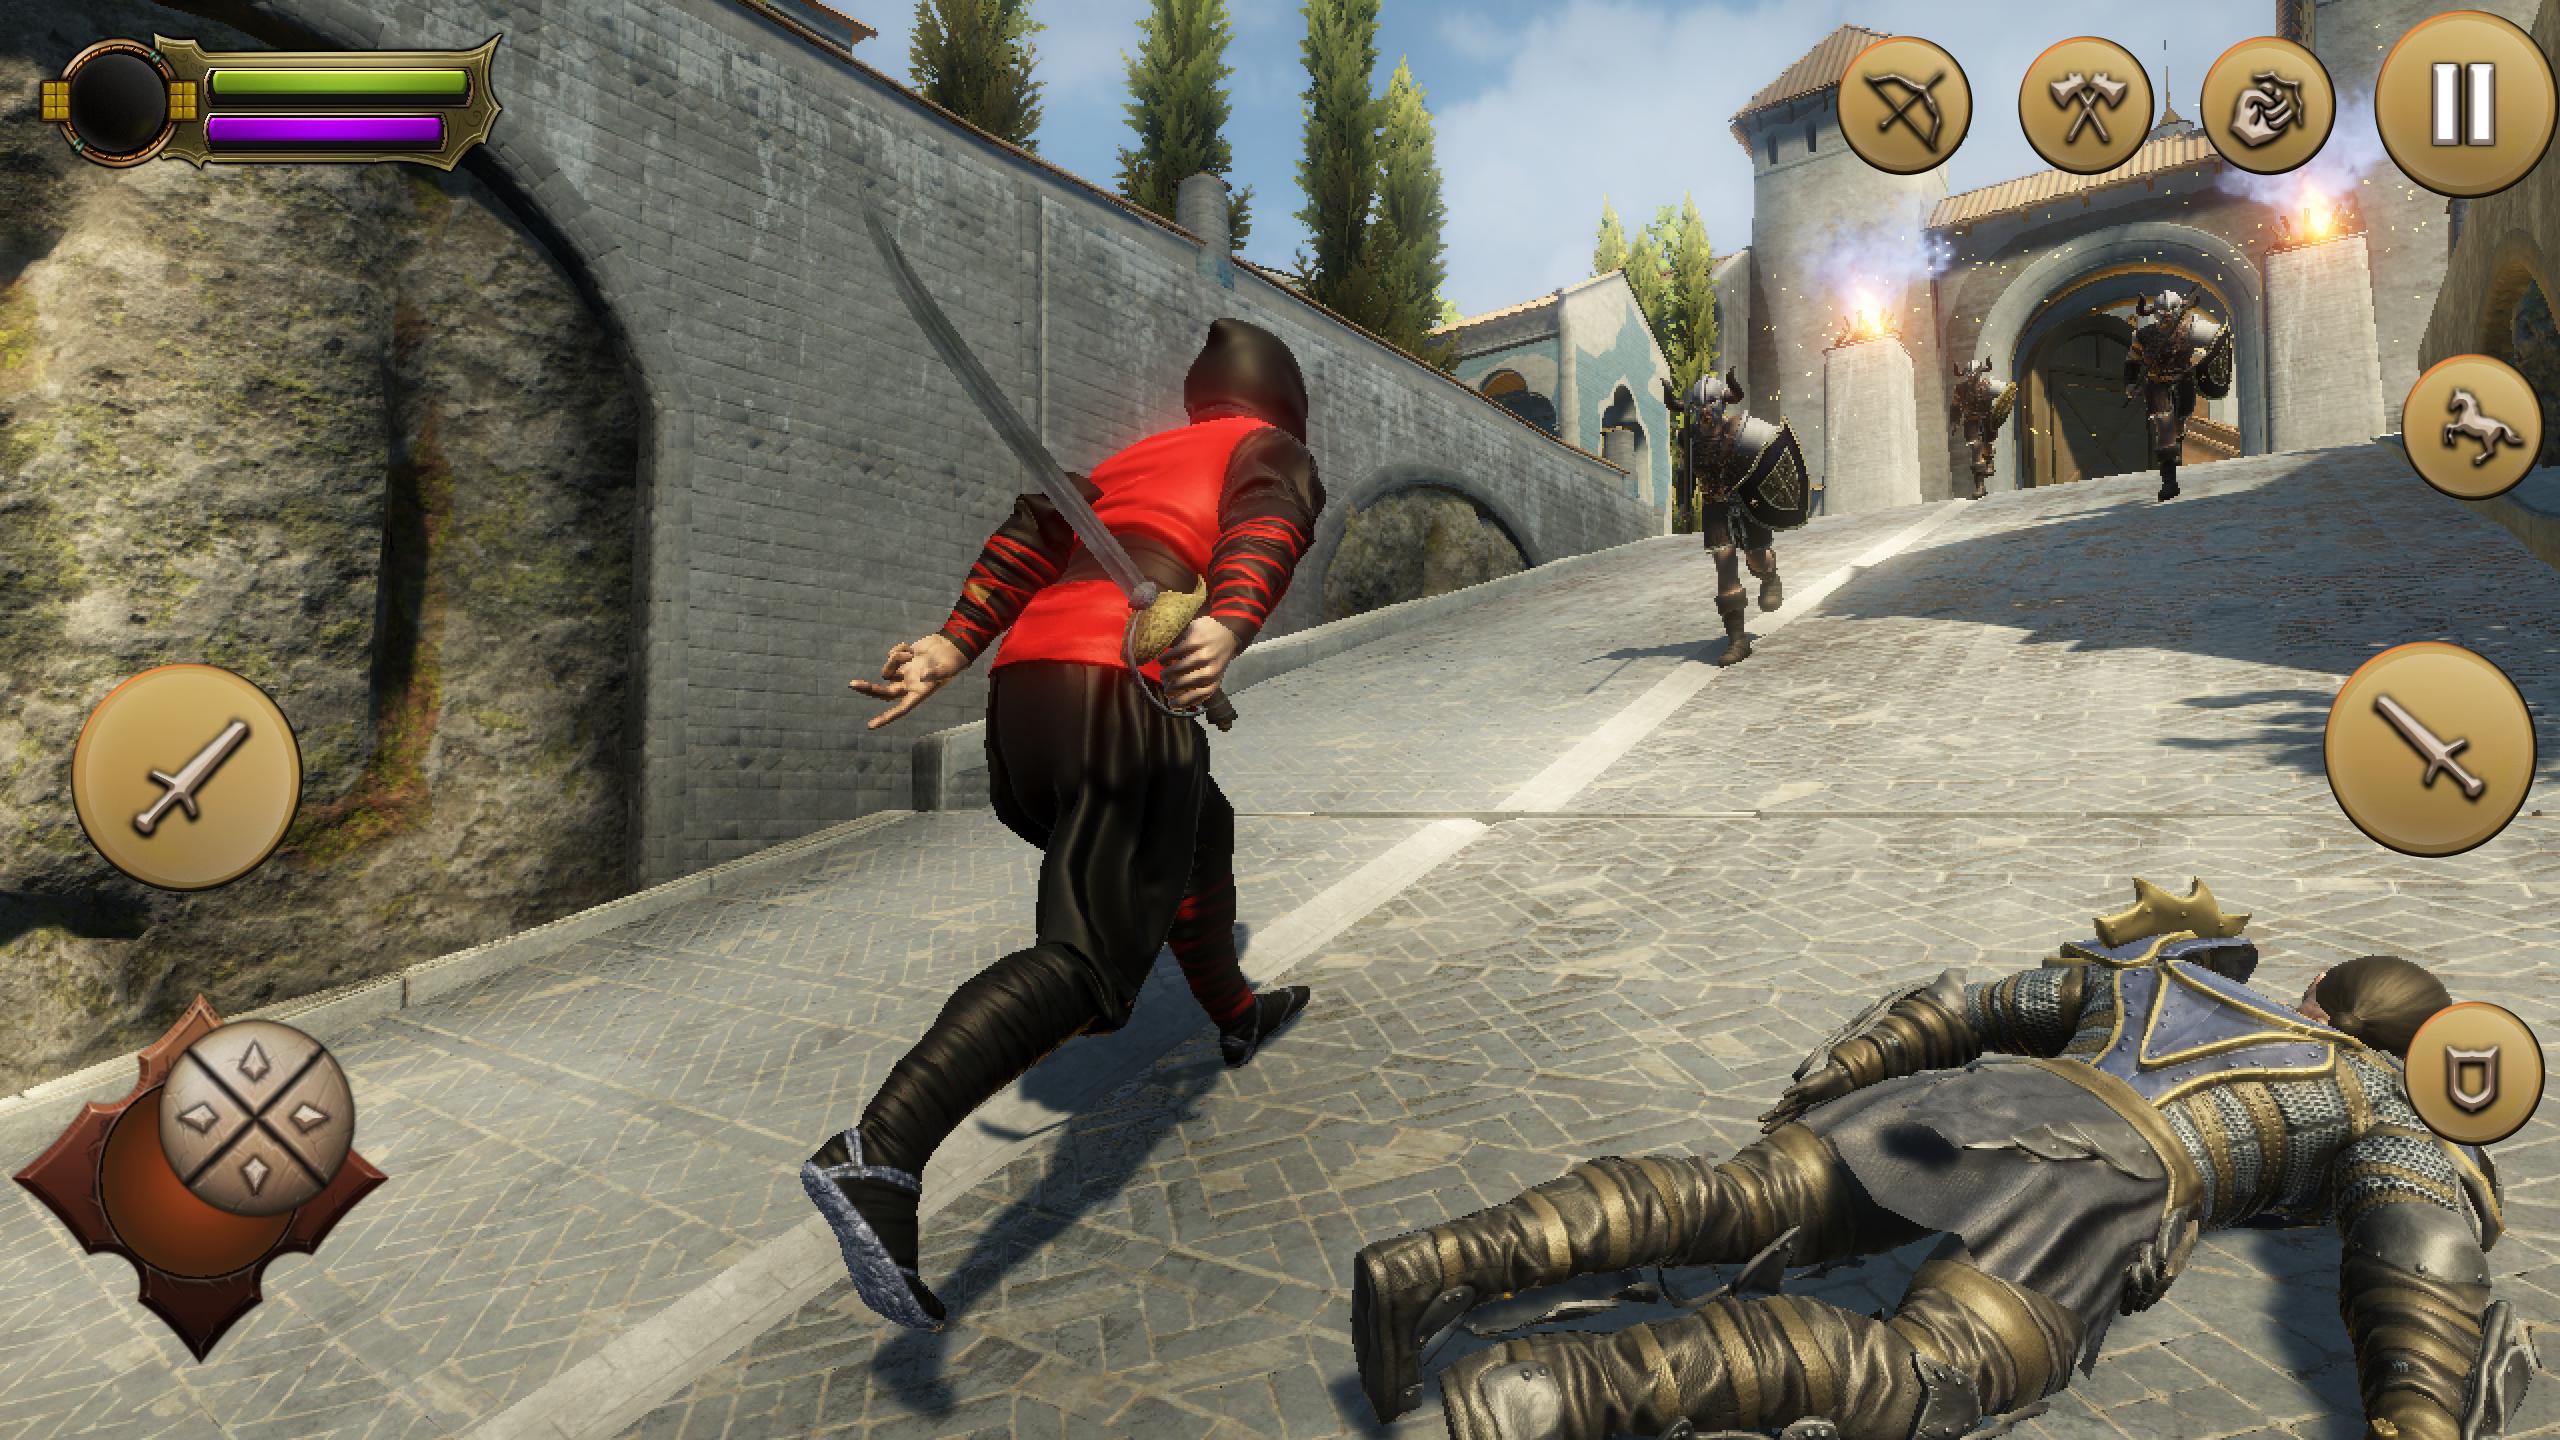 Assassin's Creed™ APK (Android Game) - Free Download